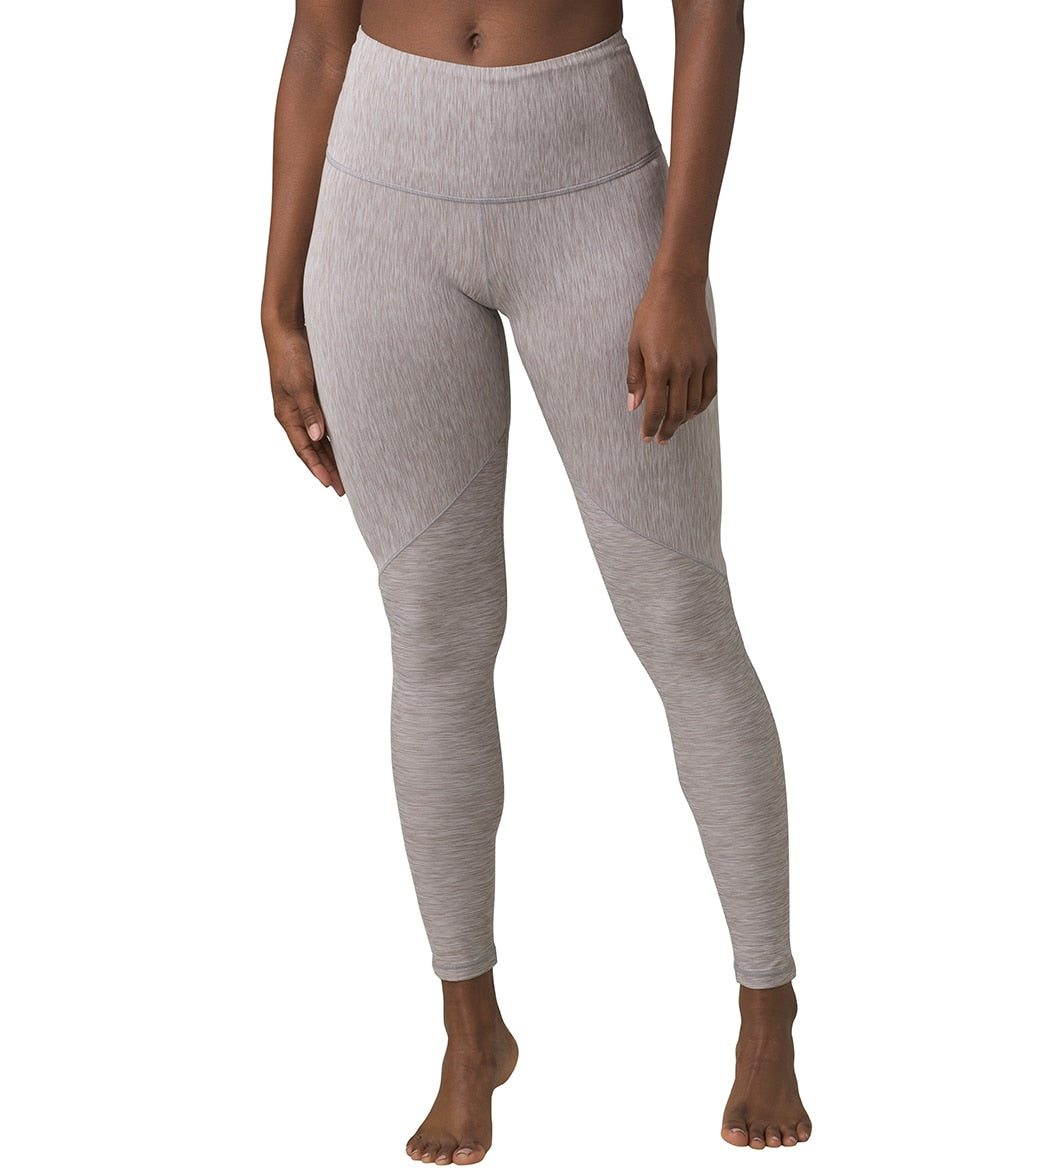 Women's clothing, pants, leggings, tops for yoga, climbing - Gaiam - Yoga  mats, fitness clothes and wellness products